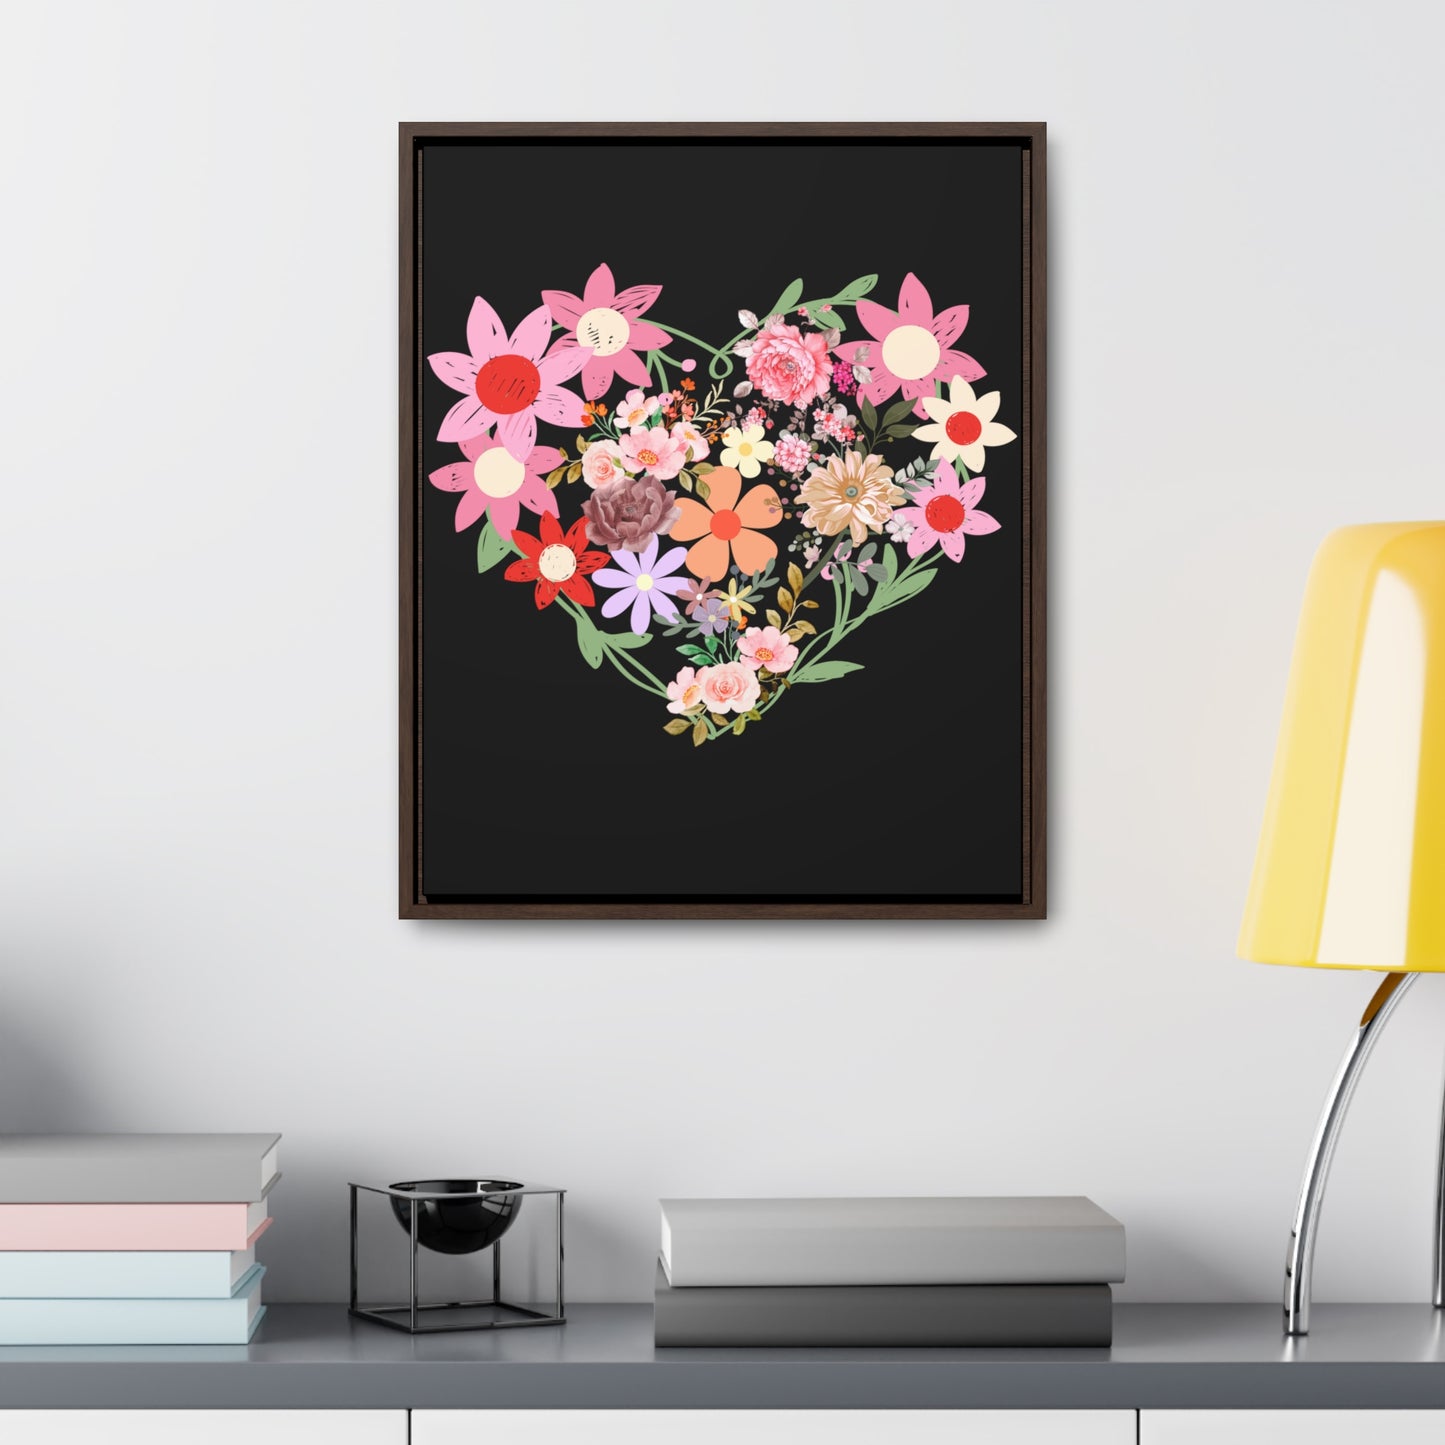 Wild Flower Heart Gallery Canvas Wraps, Home decorations, New house gift, Wall art, Home decor gift, house warming gift, home gifts,